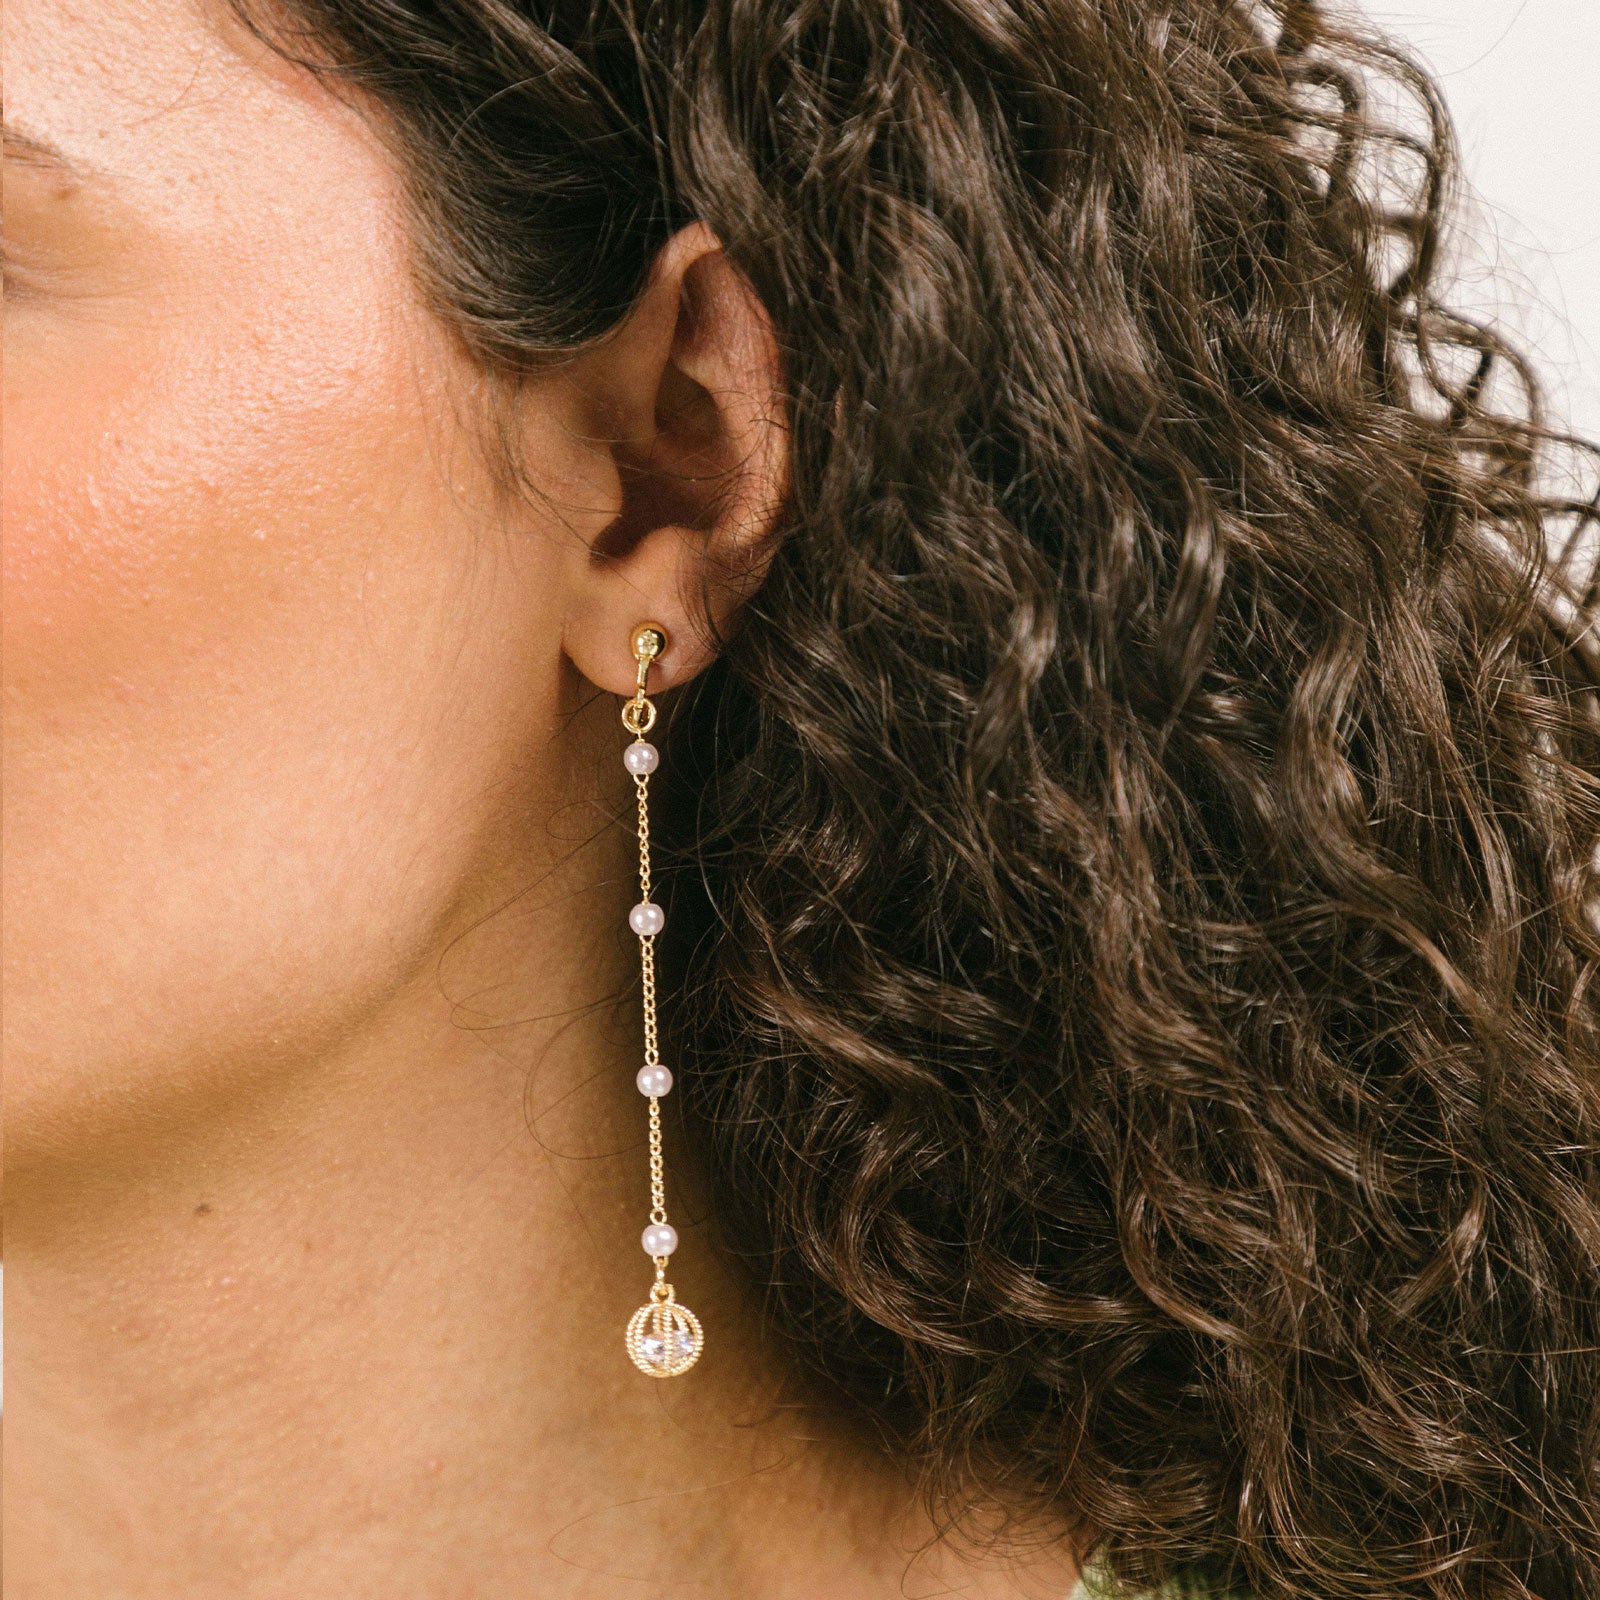 A model wearing the Pearl Drop Clip-On Earrings features a secure screw-back closure. Compatible with all ear types, these earrings provide a comfortable wear of 8-12 hours and offer an adjustable hold strength. Constructed with gold-tone plated metal alloy and a faux pearl, this single pair of earrings is sure to become a favorite.